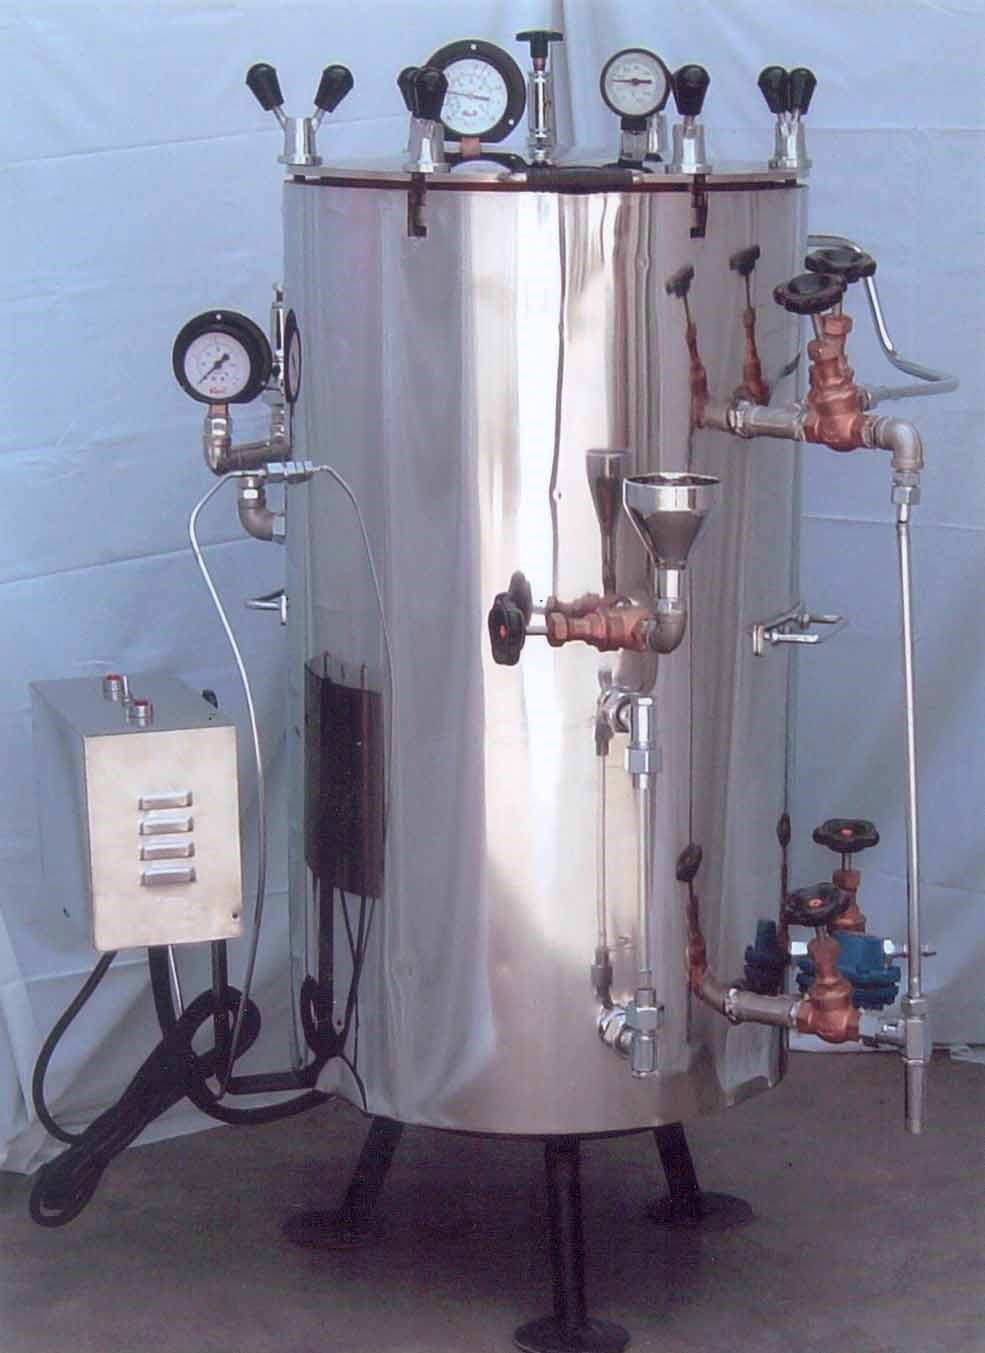 Steam Sterilizer High Pressure Vertical Cylindrical Type Size:16 x 24 (Electric) (K-AUTOCLAVE)